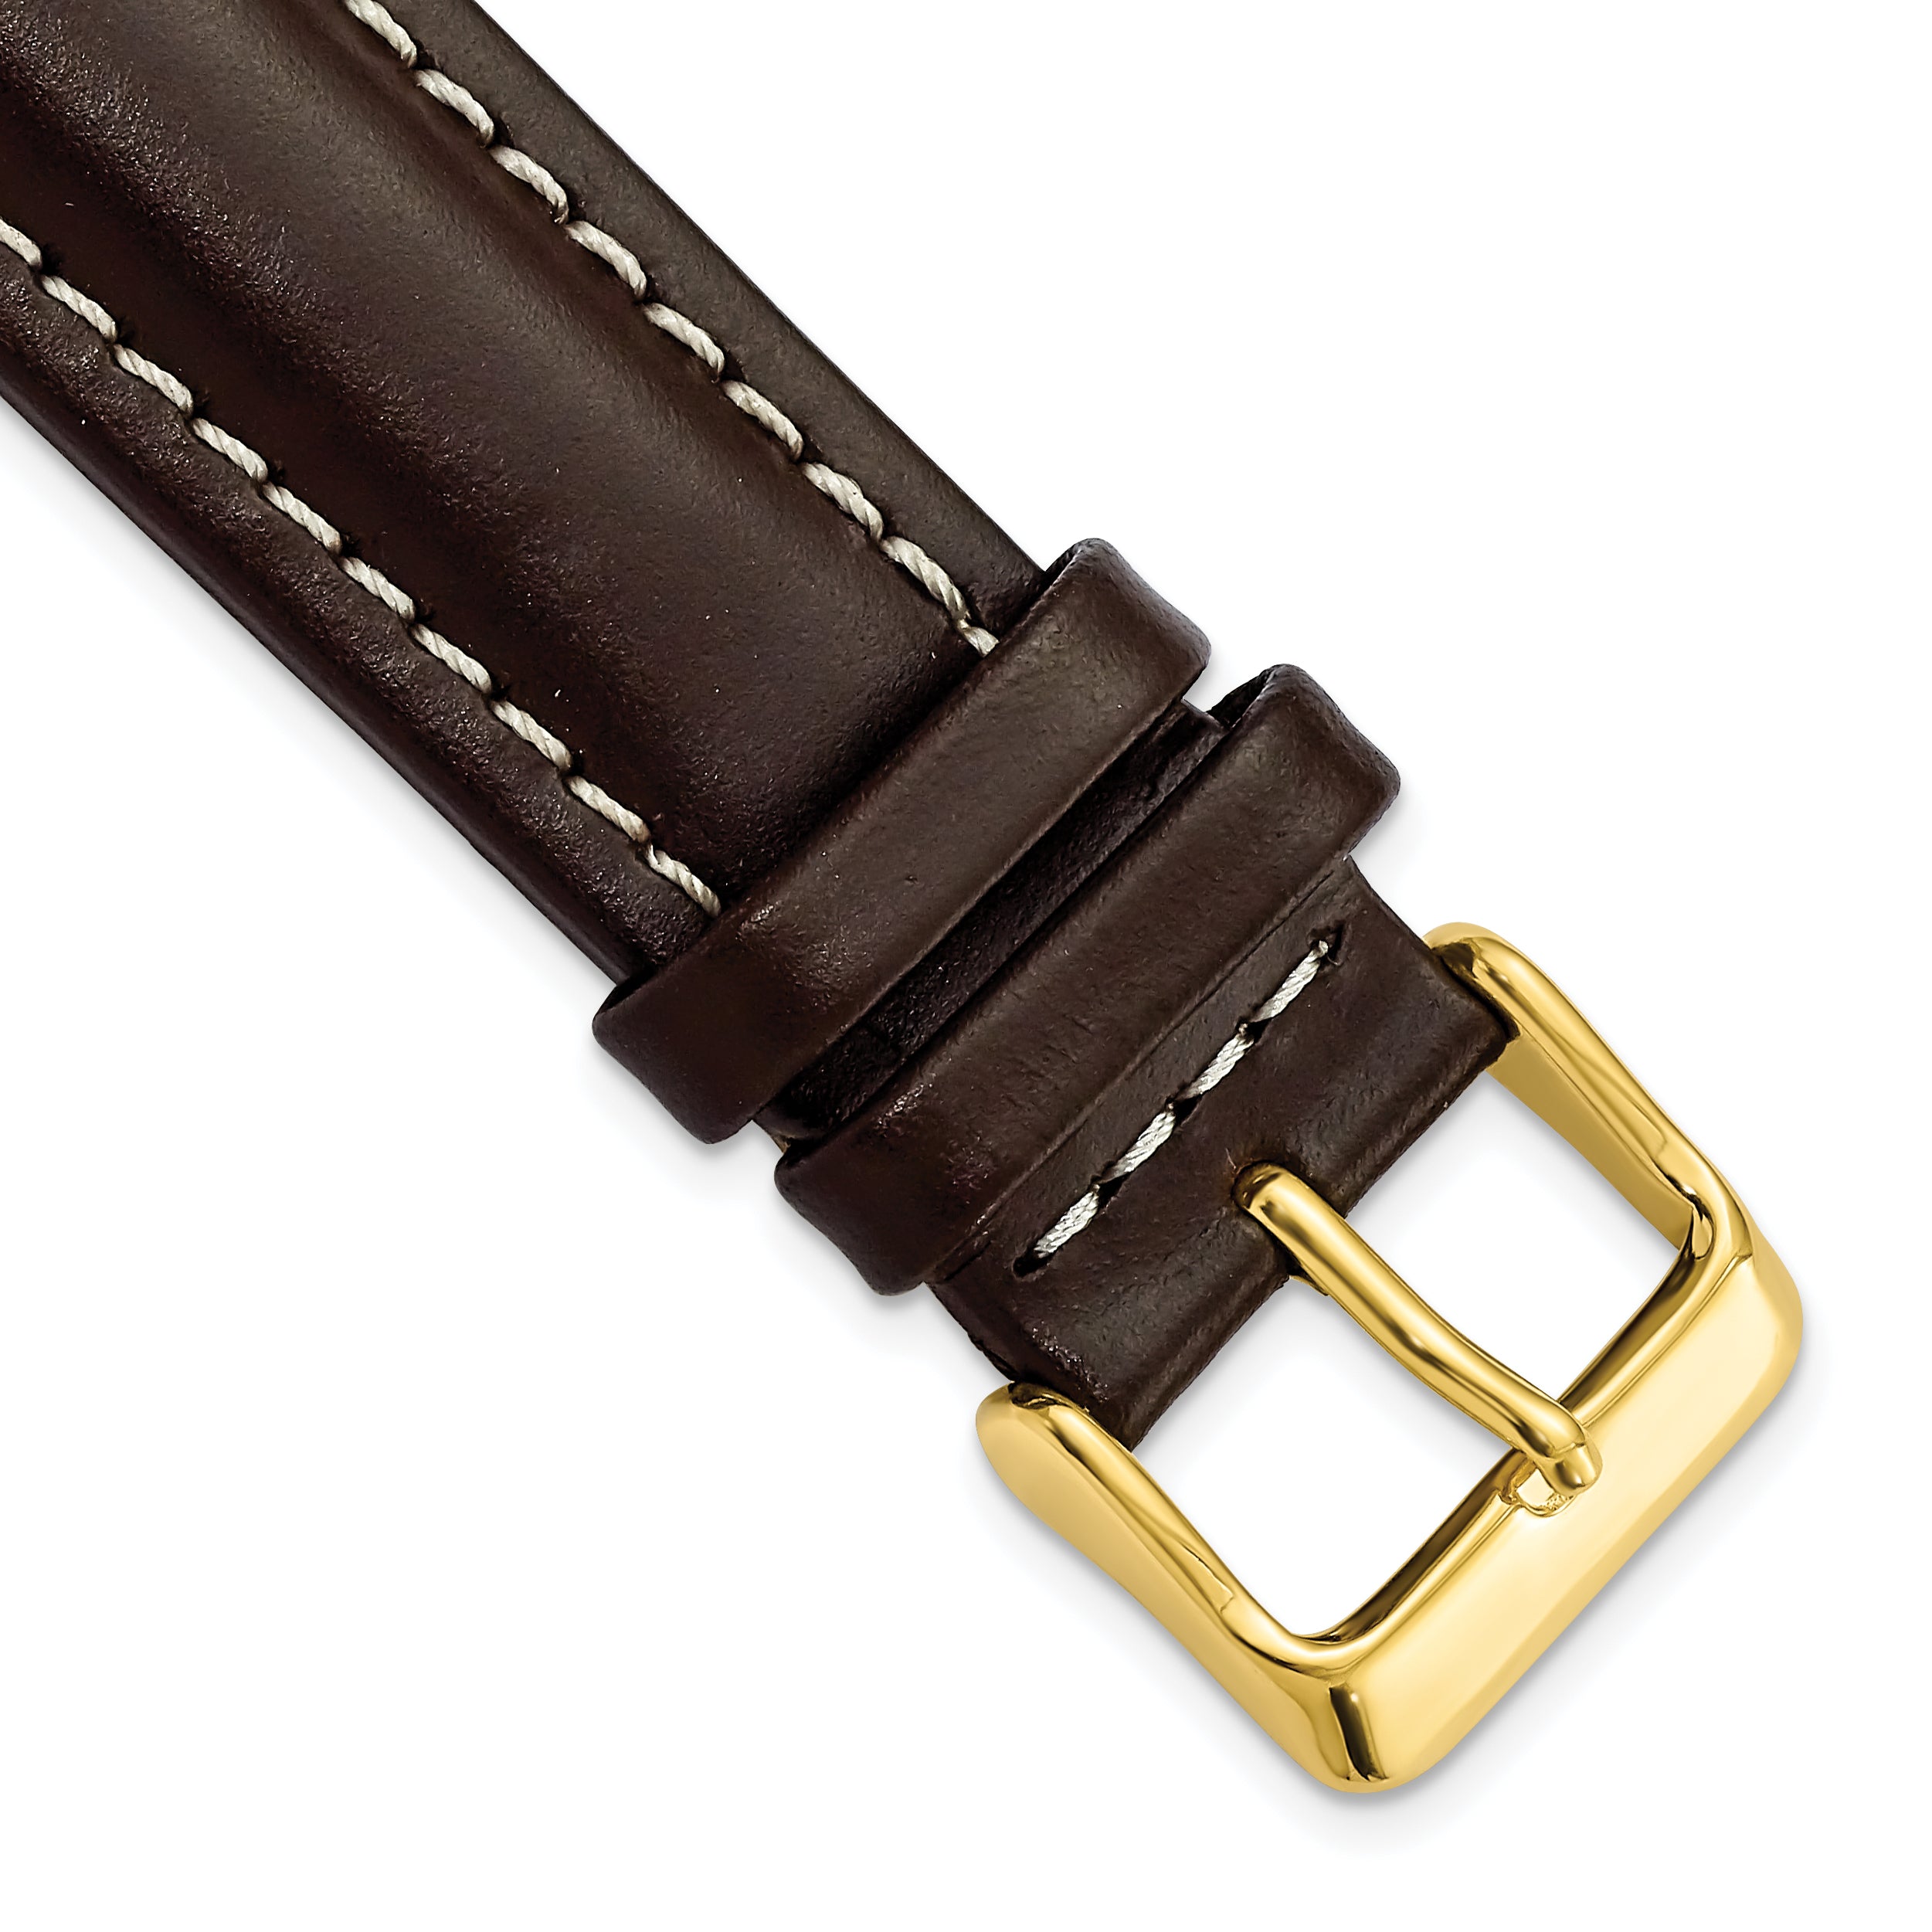 DeBeer 20mm Dark Brown Oil-tanned Leather with White Stitching and Gold-tone Buckle 7.5 inch Watch Band